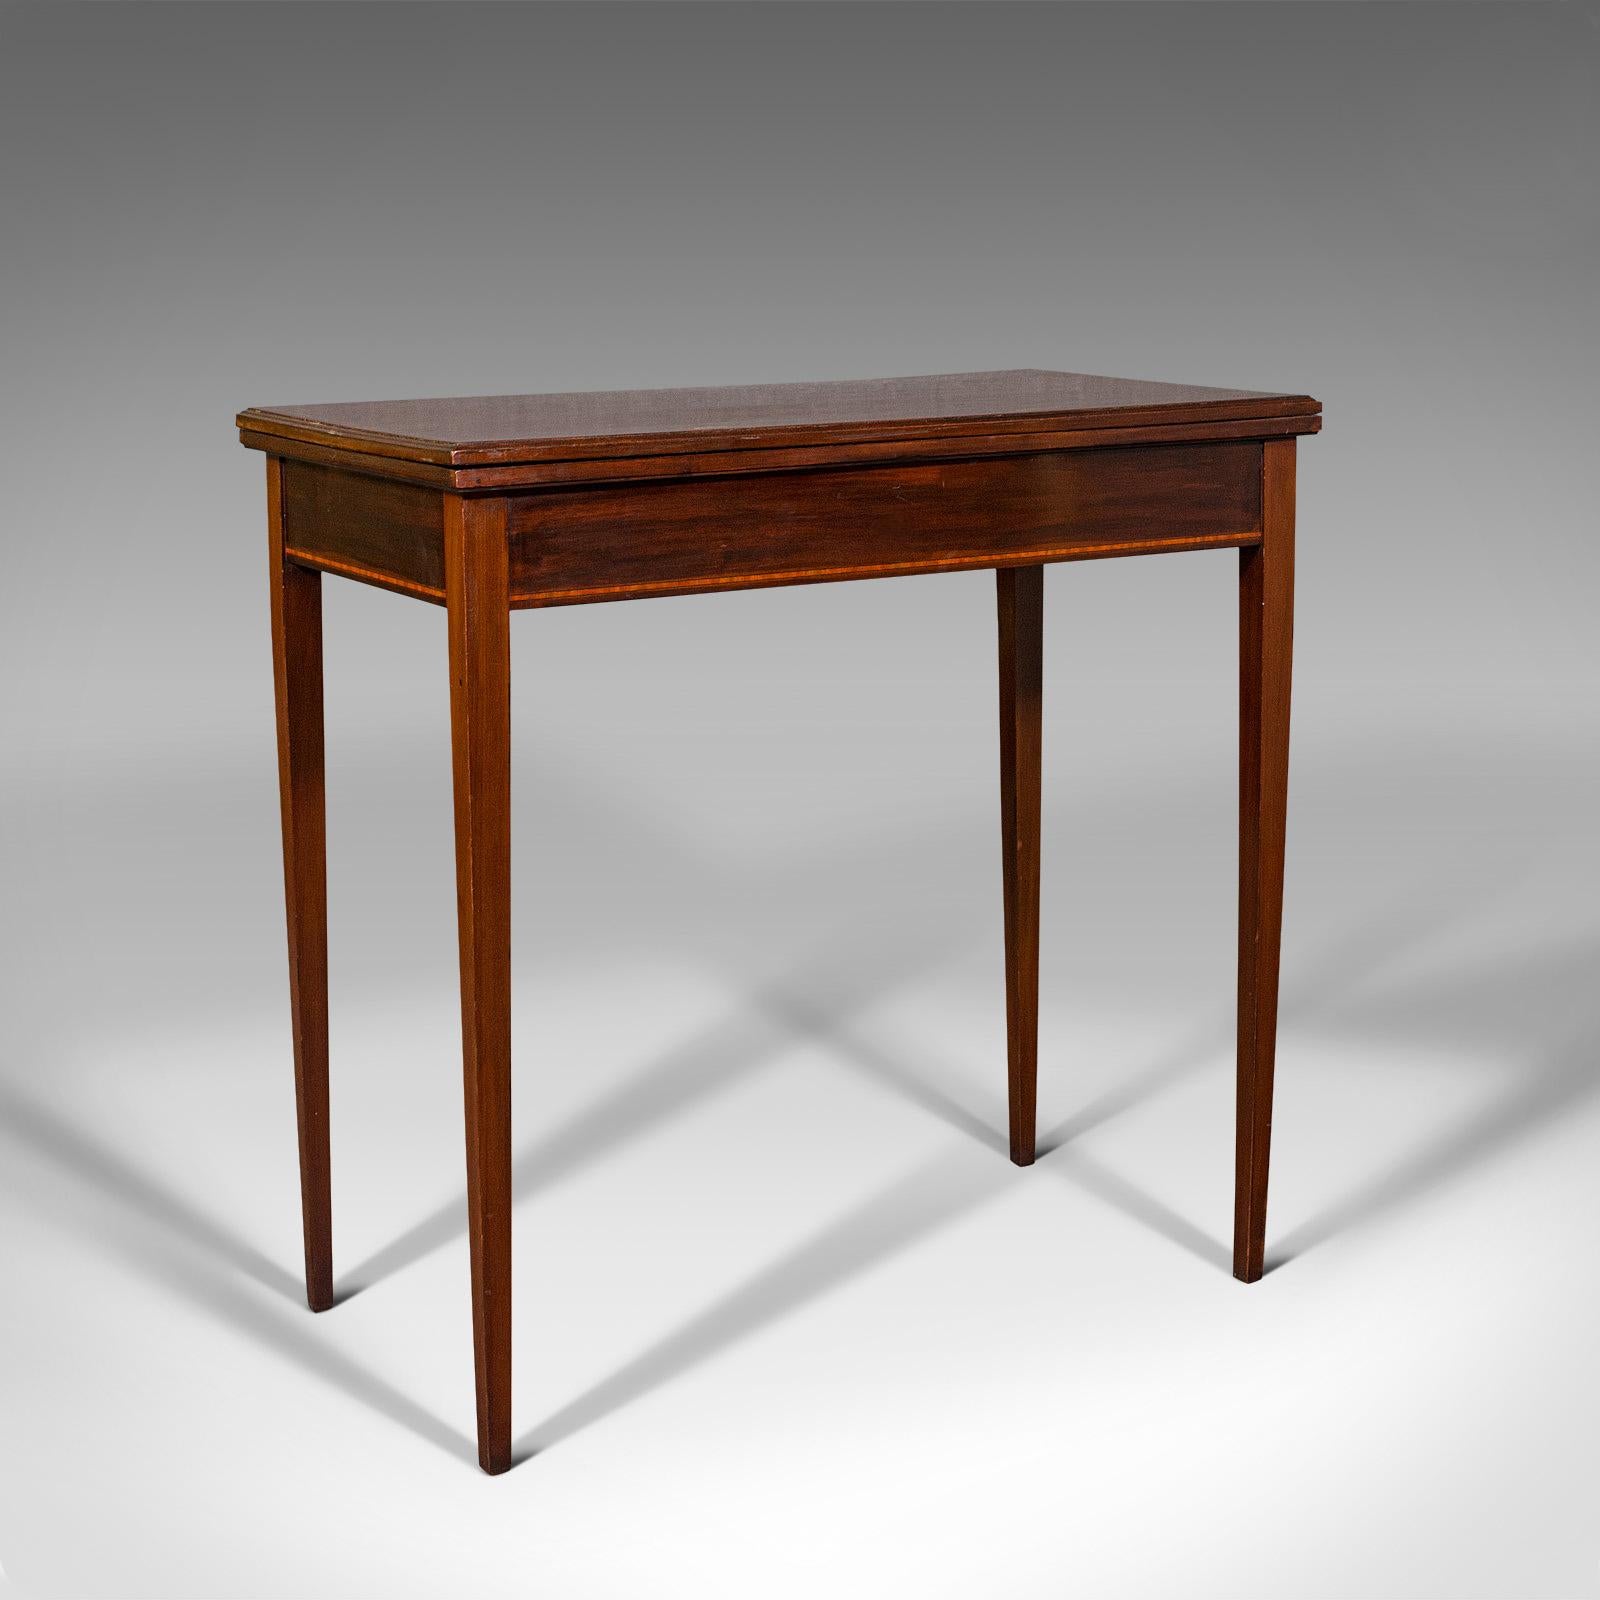 This is an antique fold-over card table. An English, mahogany and boxwood games or occasional table, dating to the Edwardian period, circa 1910.

Delightful folding card table with superb colour
Displays a desirable aged patina throughout
Select